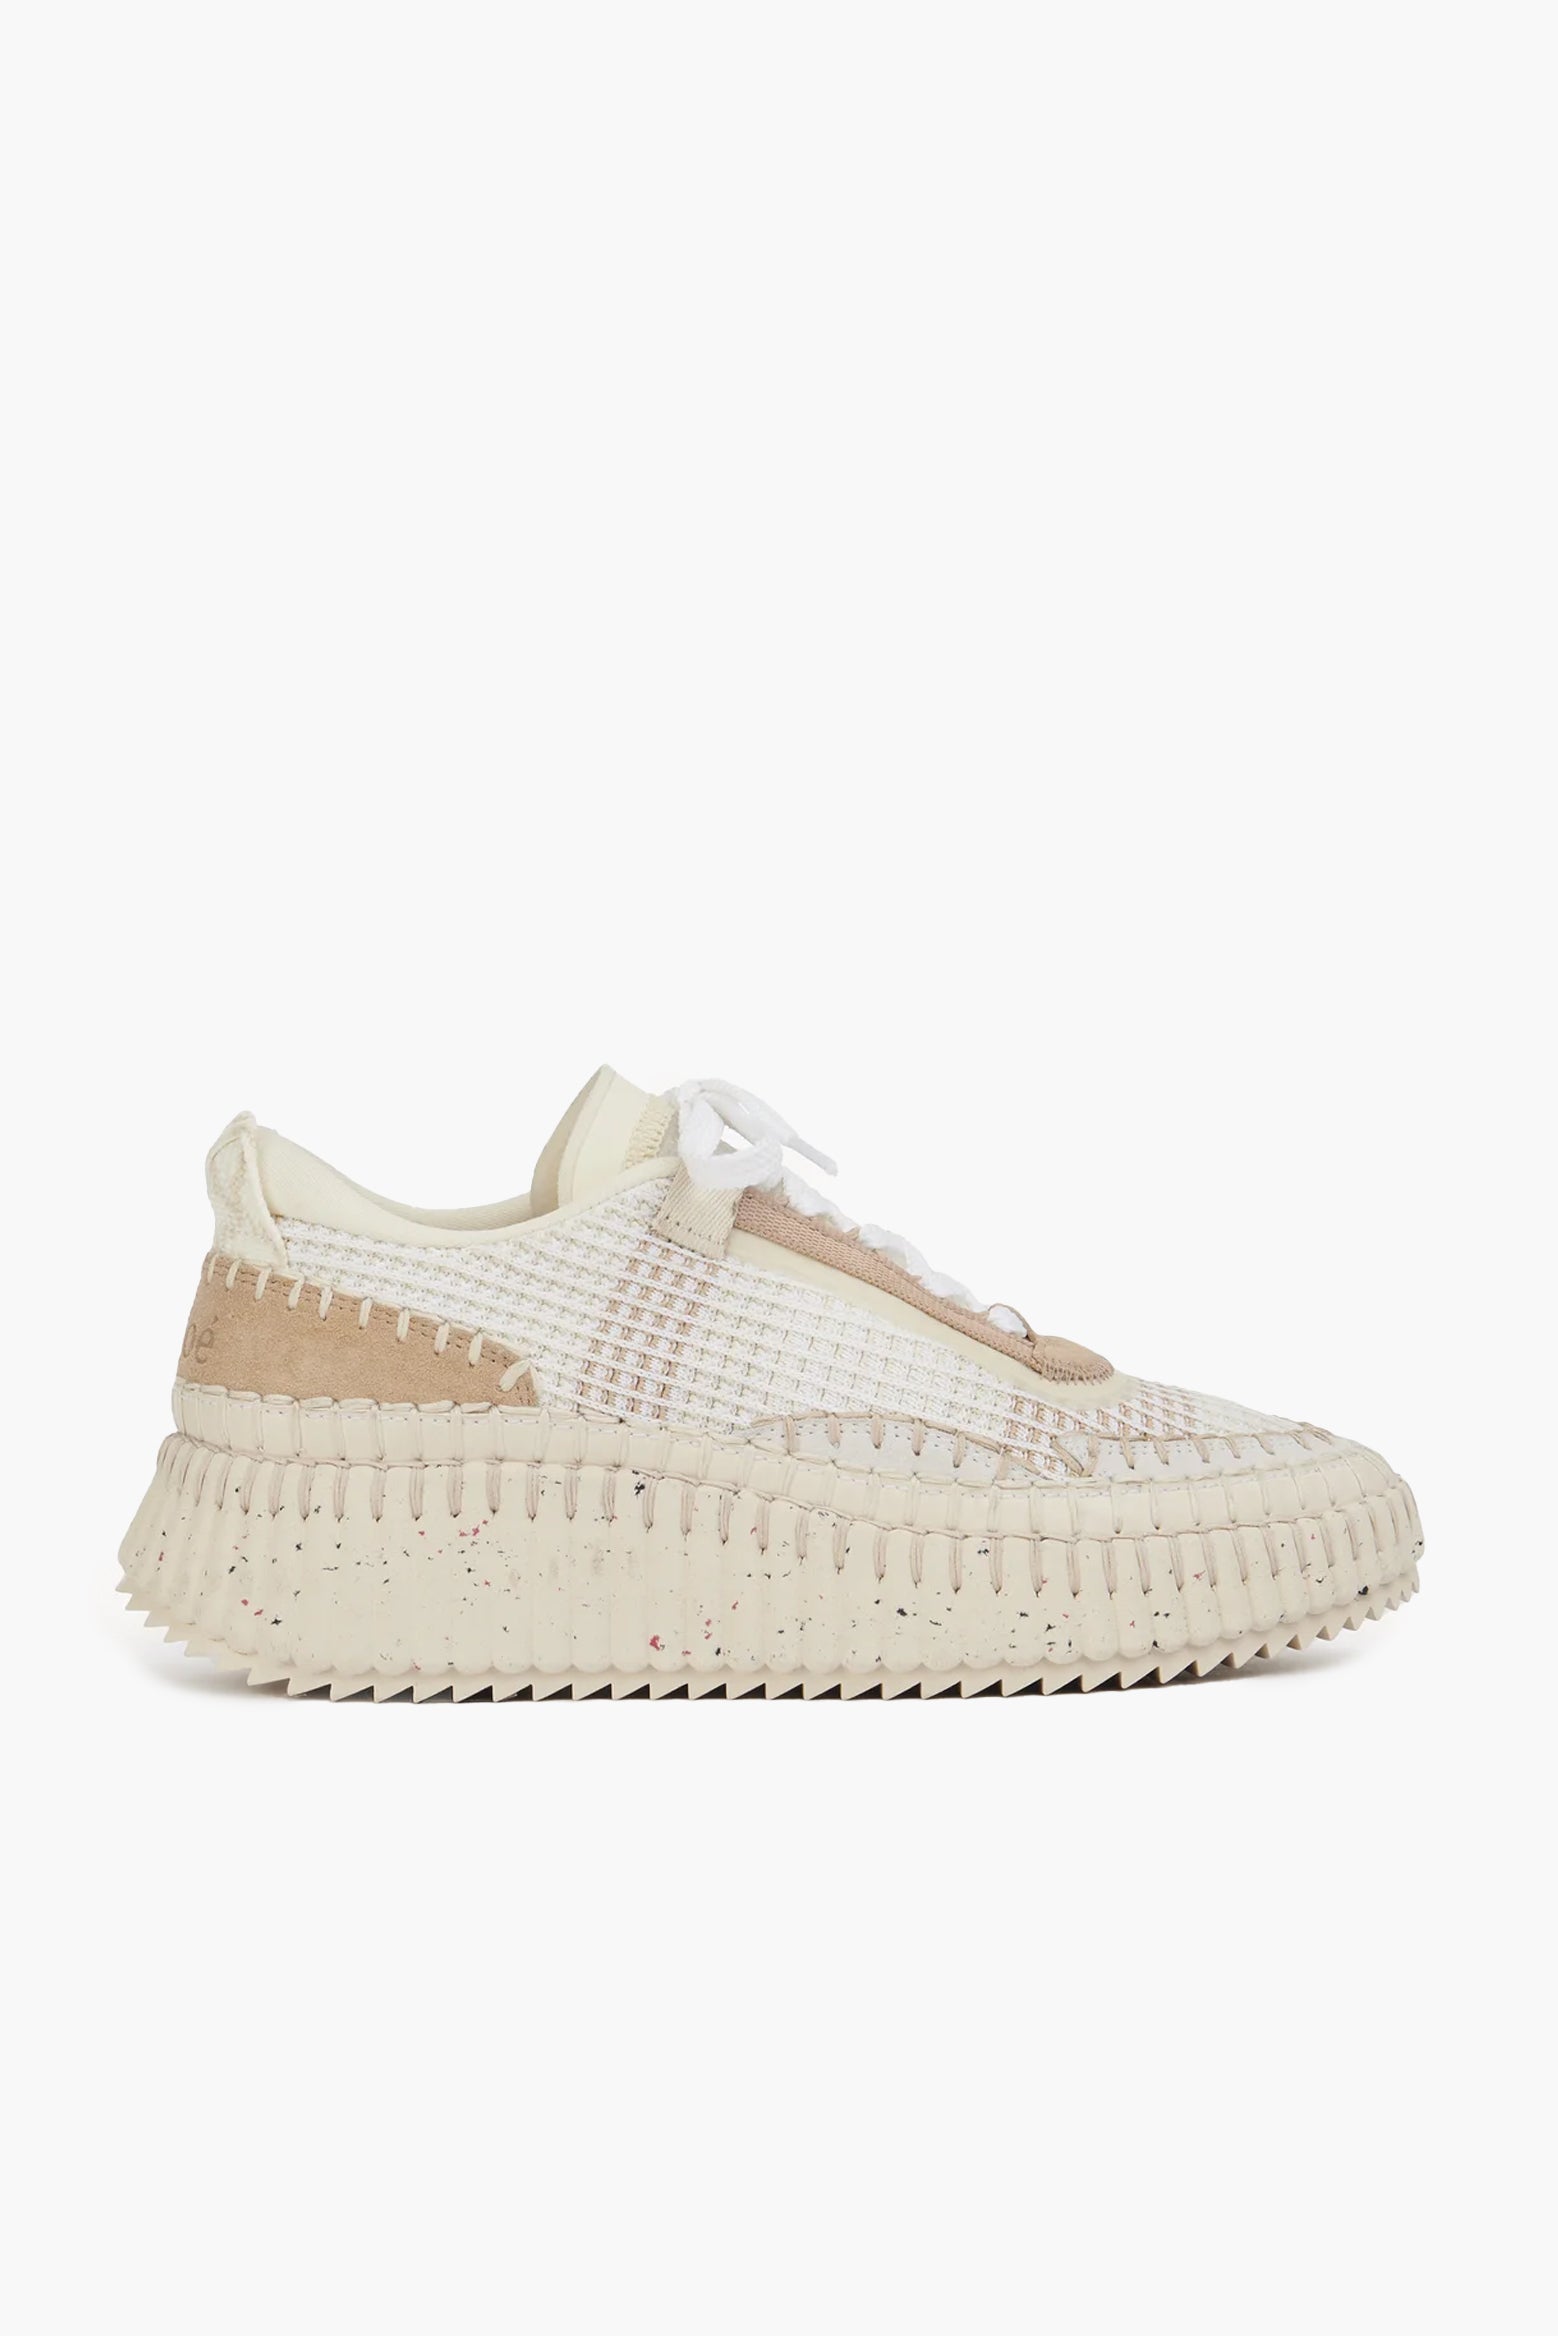 Chloé Nama Sneaker in Pearl Beige available at The New Trend Australia. 